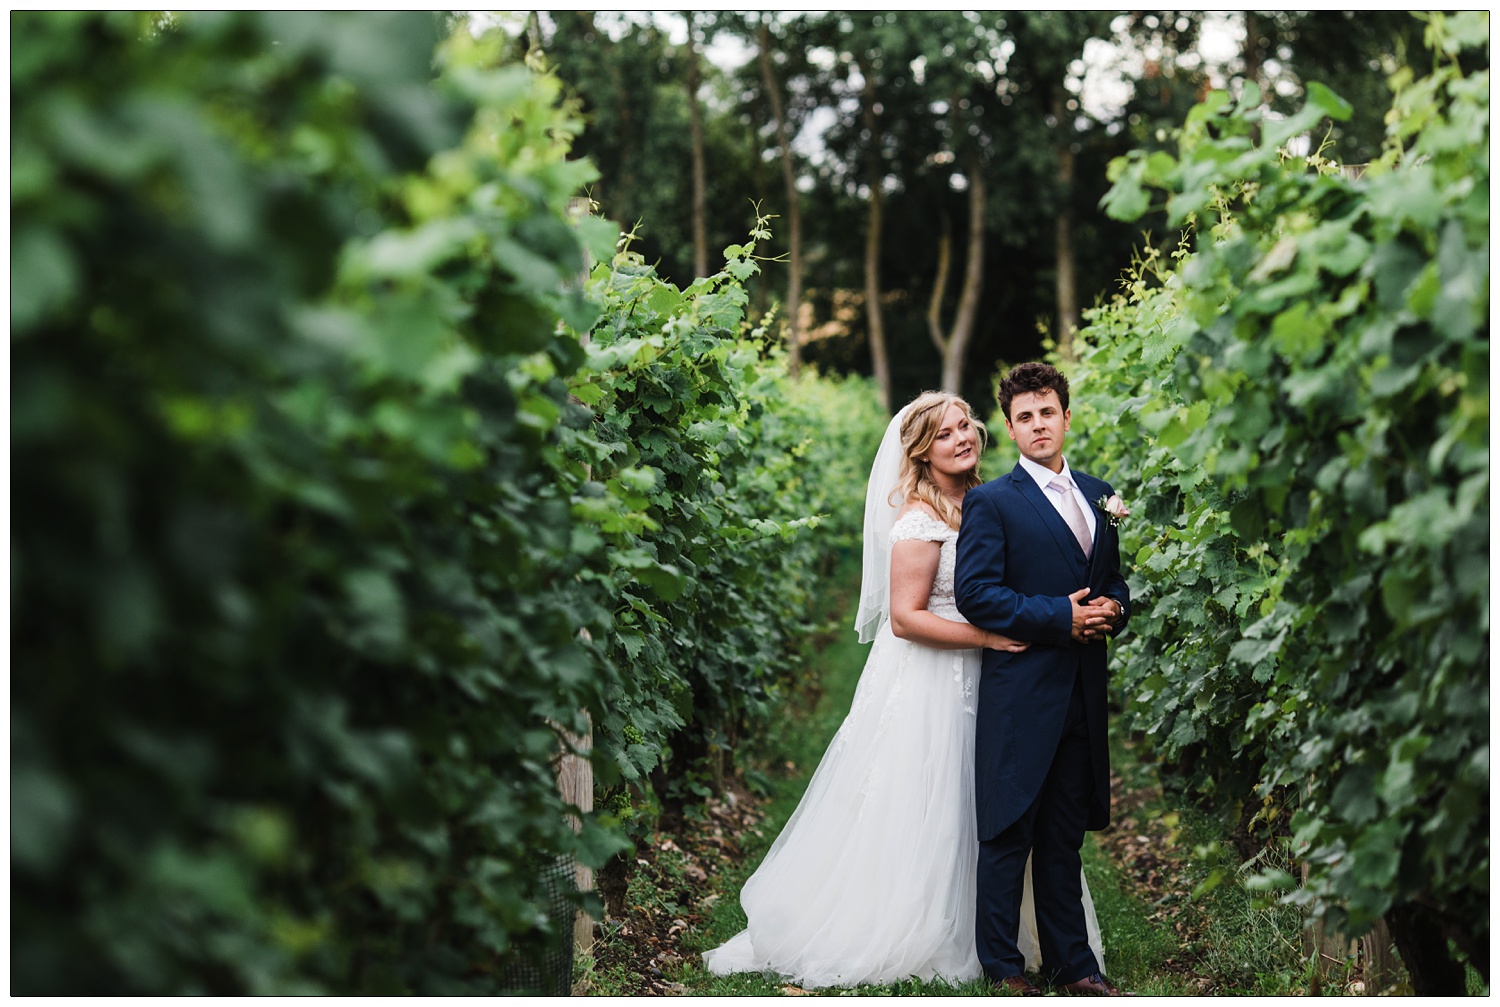 Bride and groom posing in the Bardfield vineyard at the Great Lodge venue.